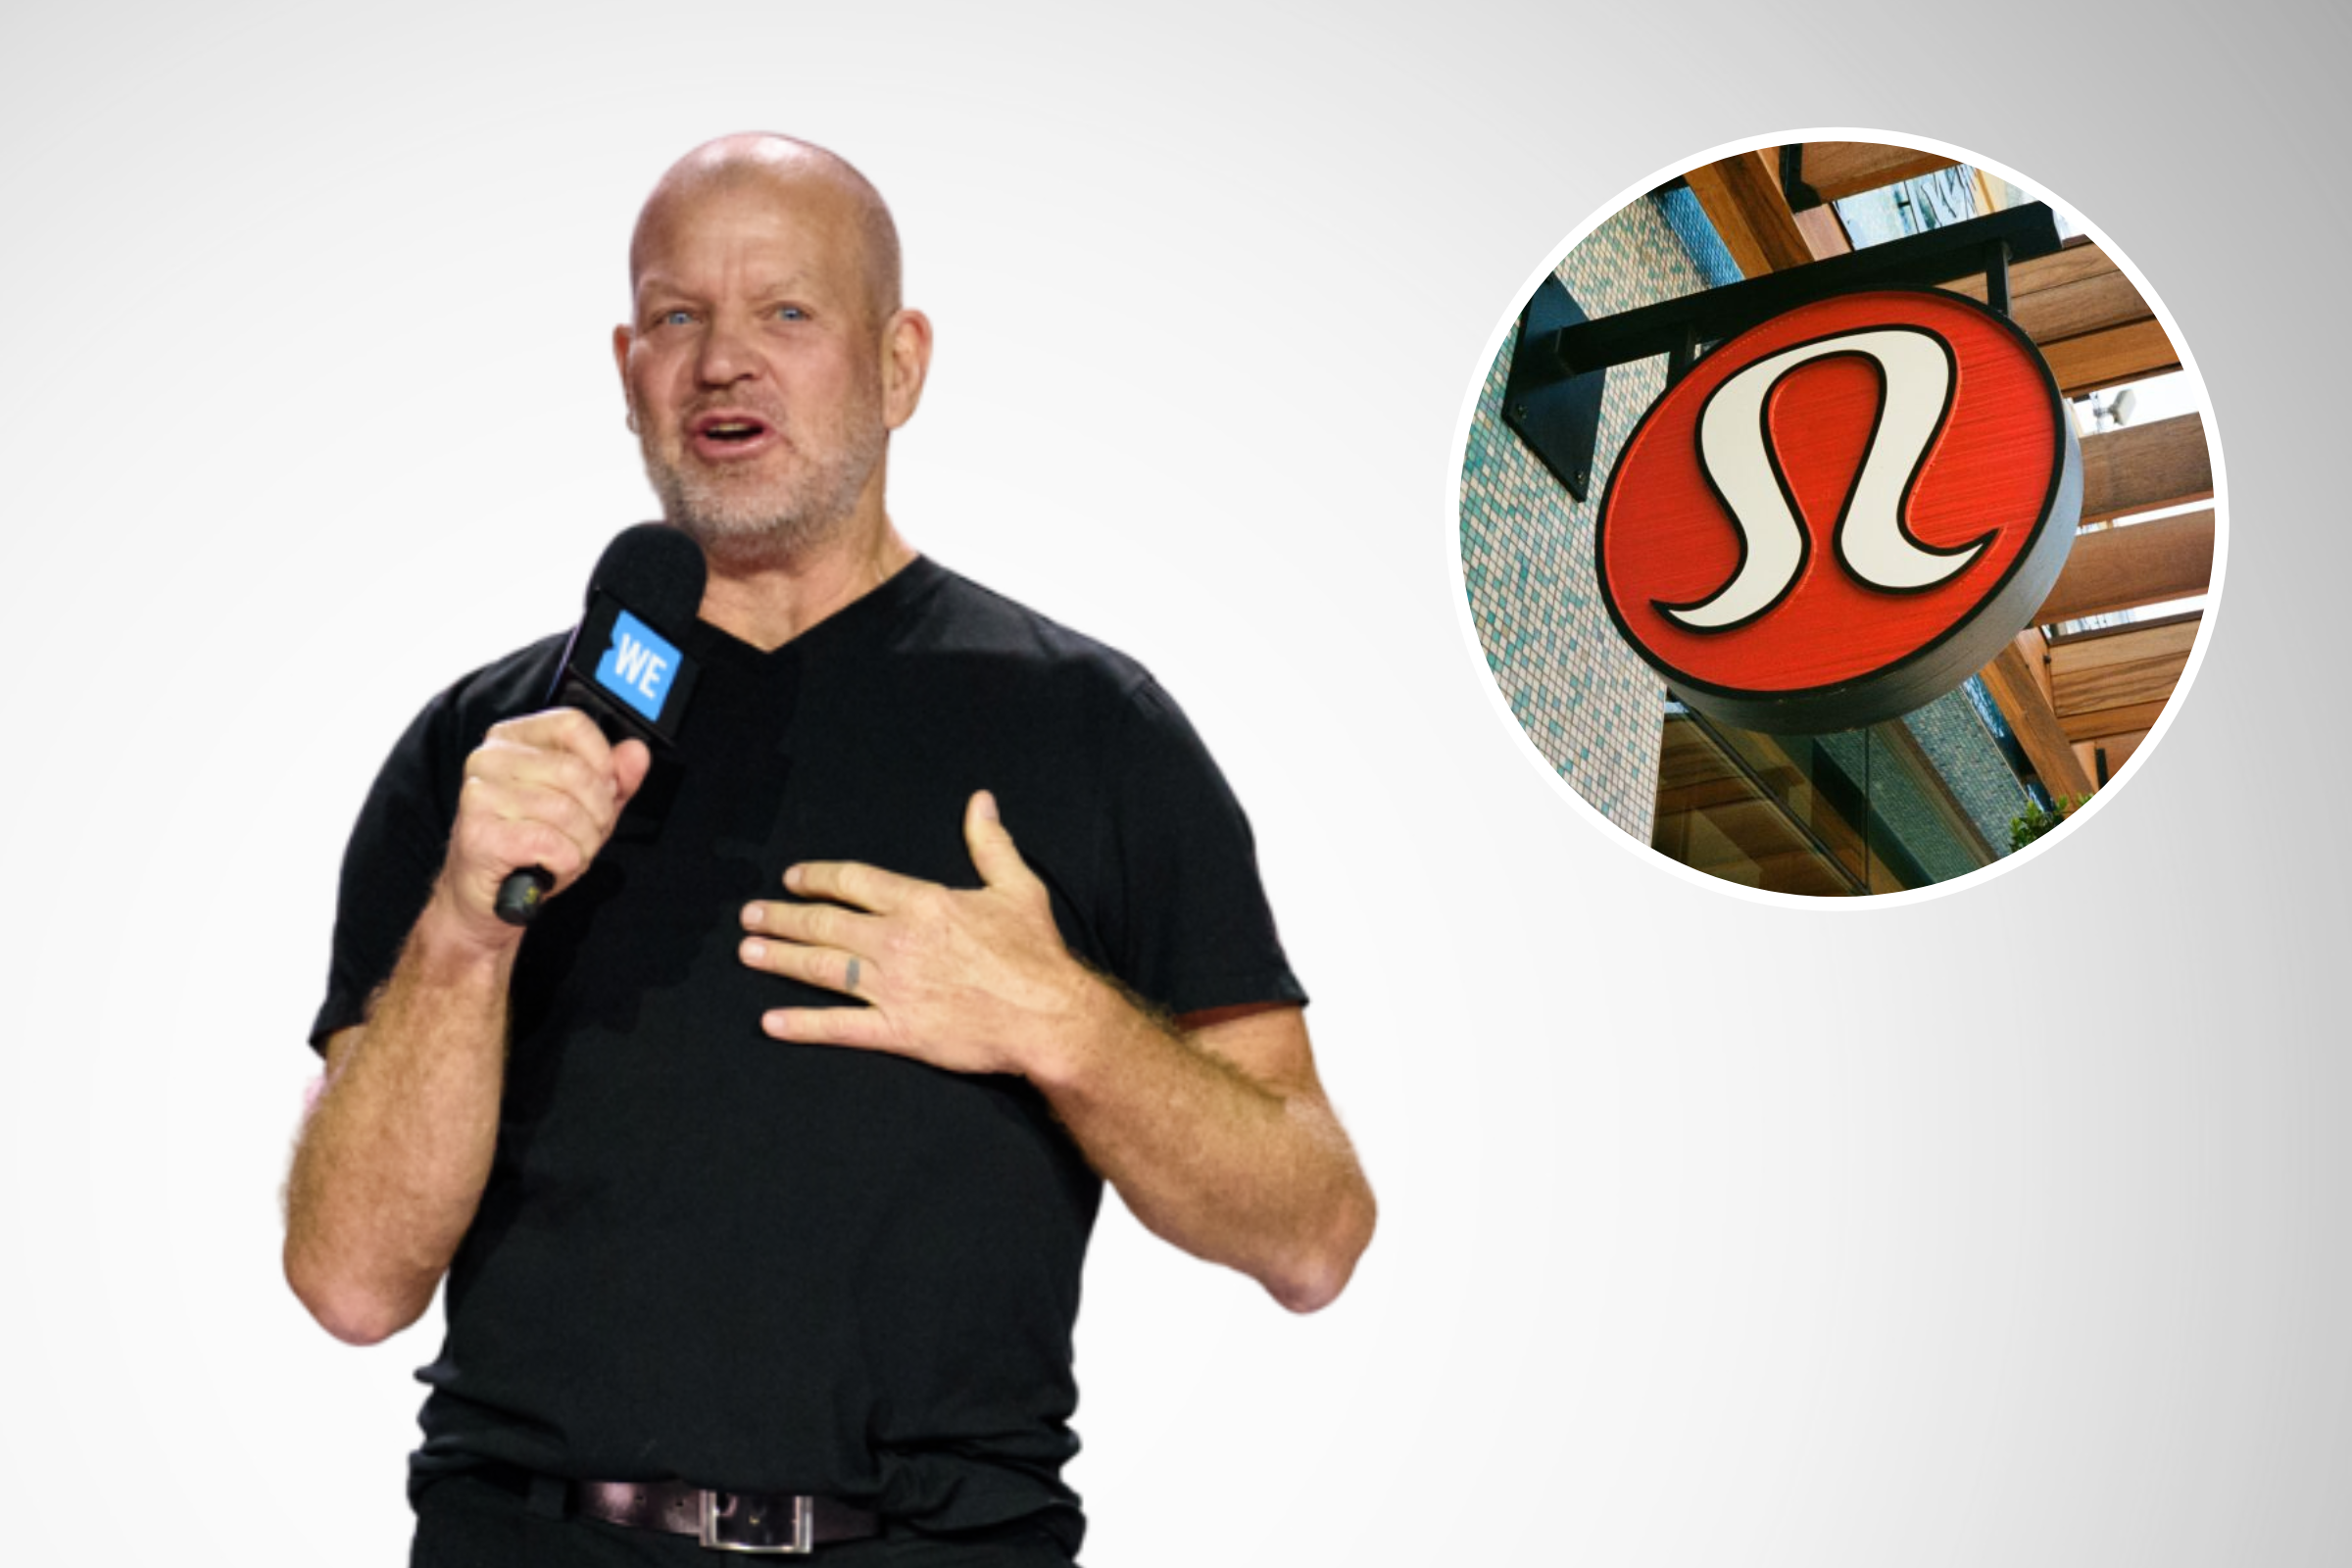 Lululemon Founder Says Company Is 'Trying to Become Like the Gap